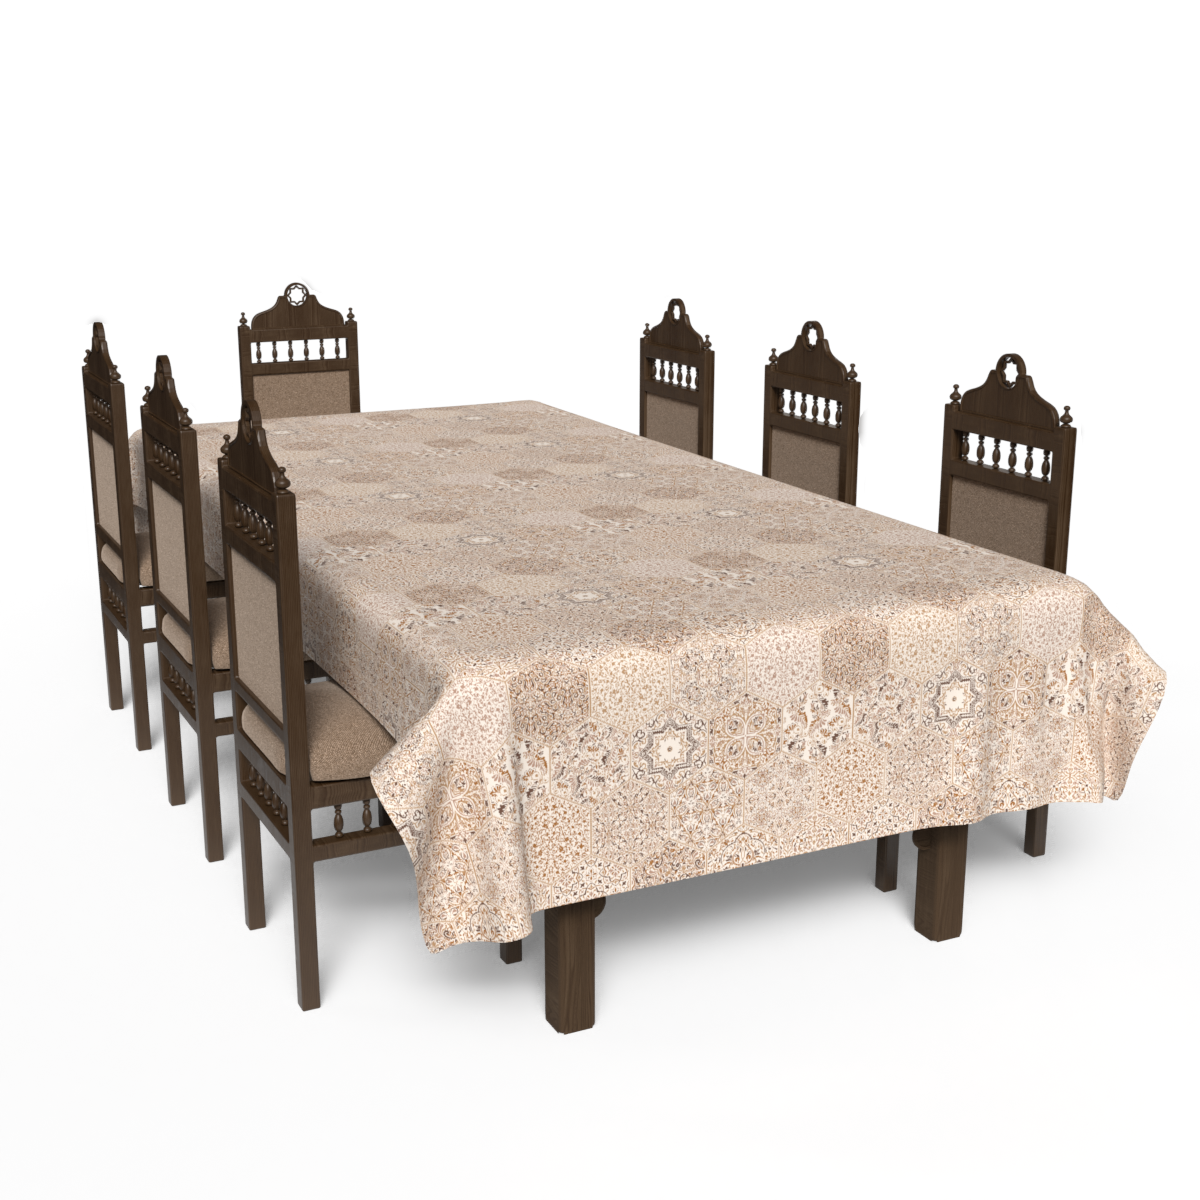 Table cloth - multiple sizes - ROM545